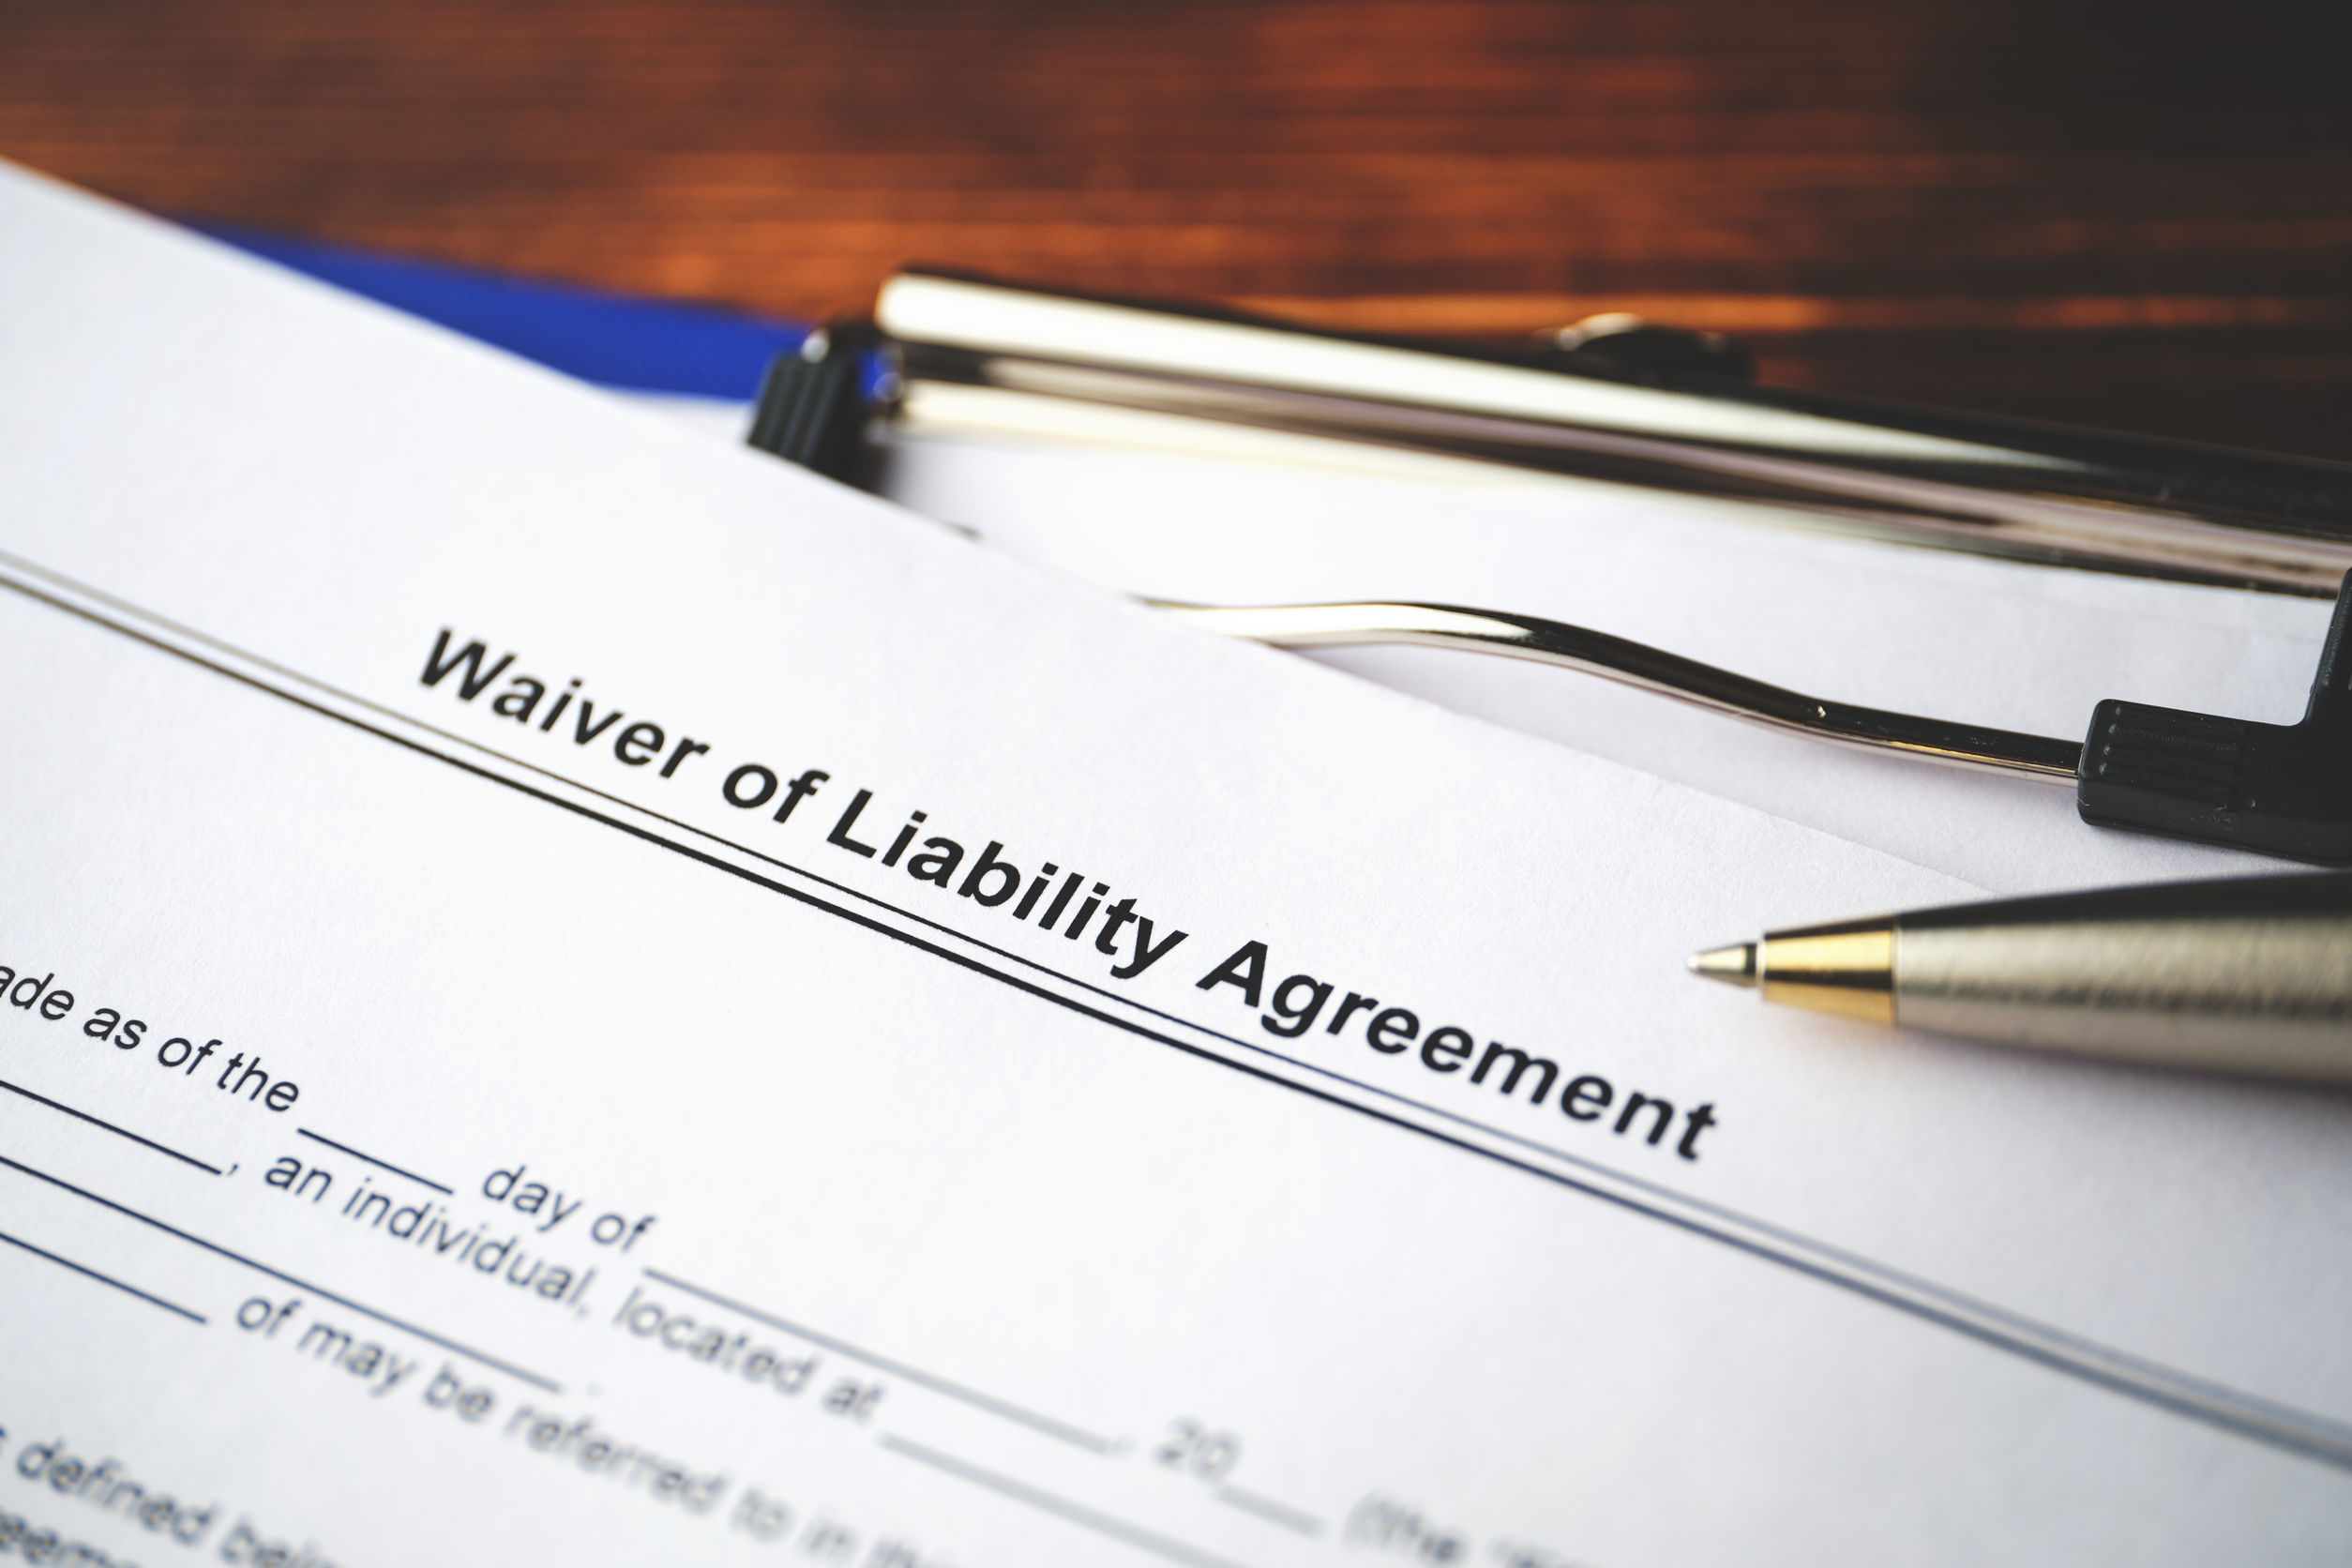 Legal document Waiver of Liability Agreement on paper close up.